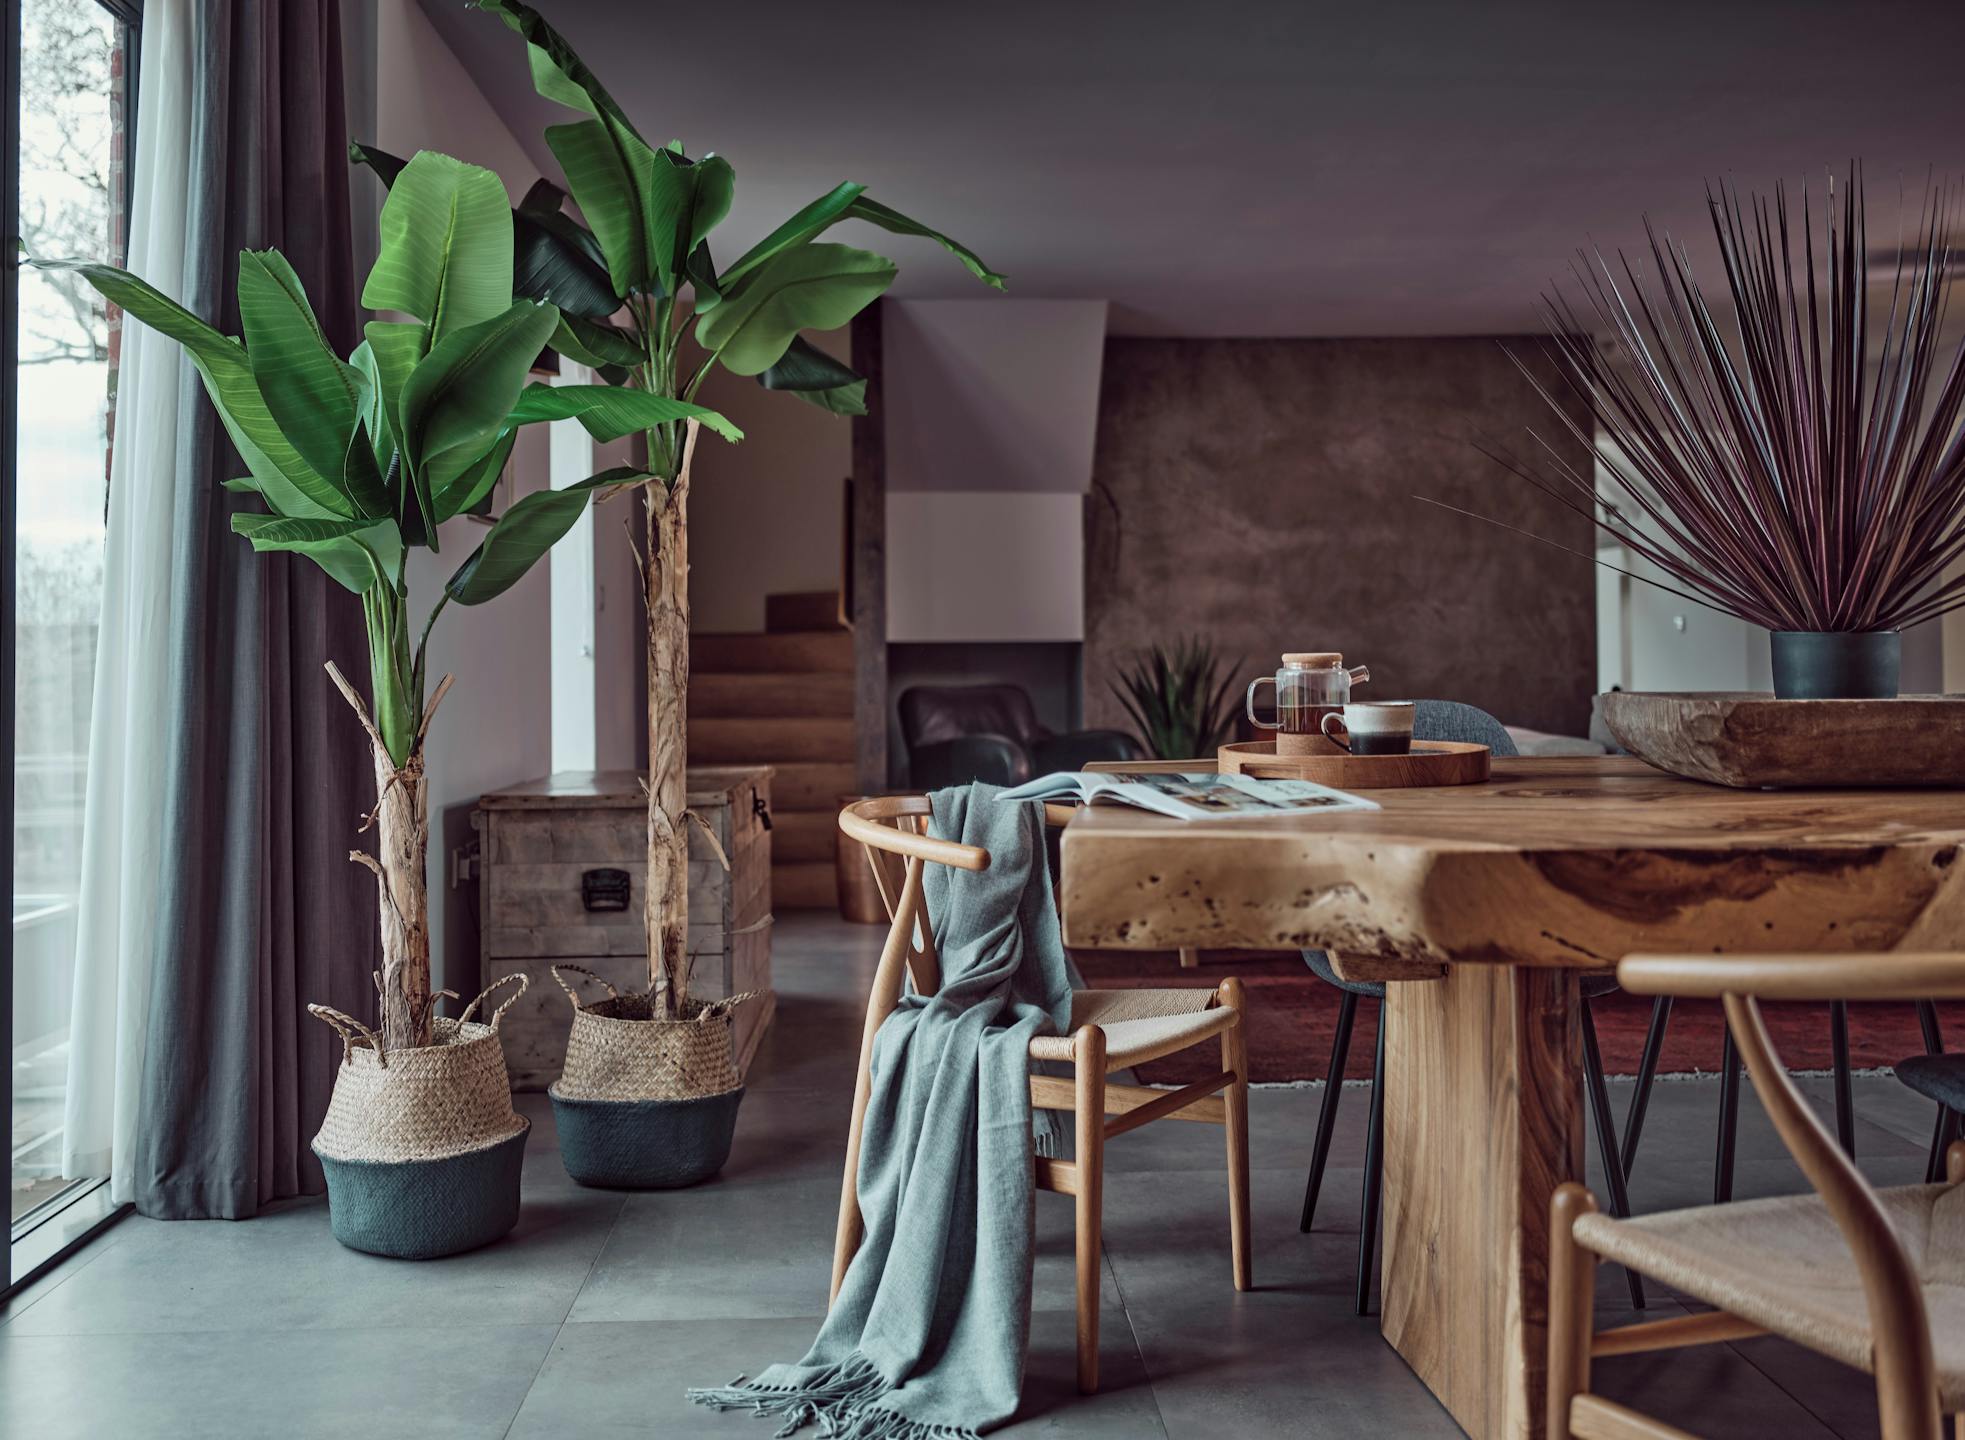 Artificial musa banana trees next to wooden table